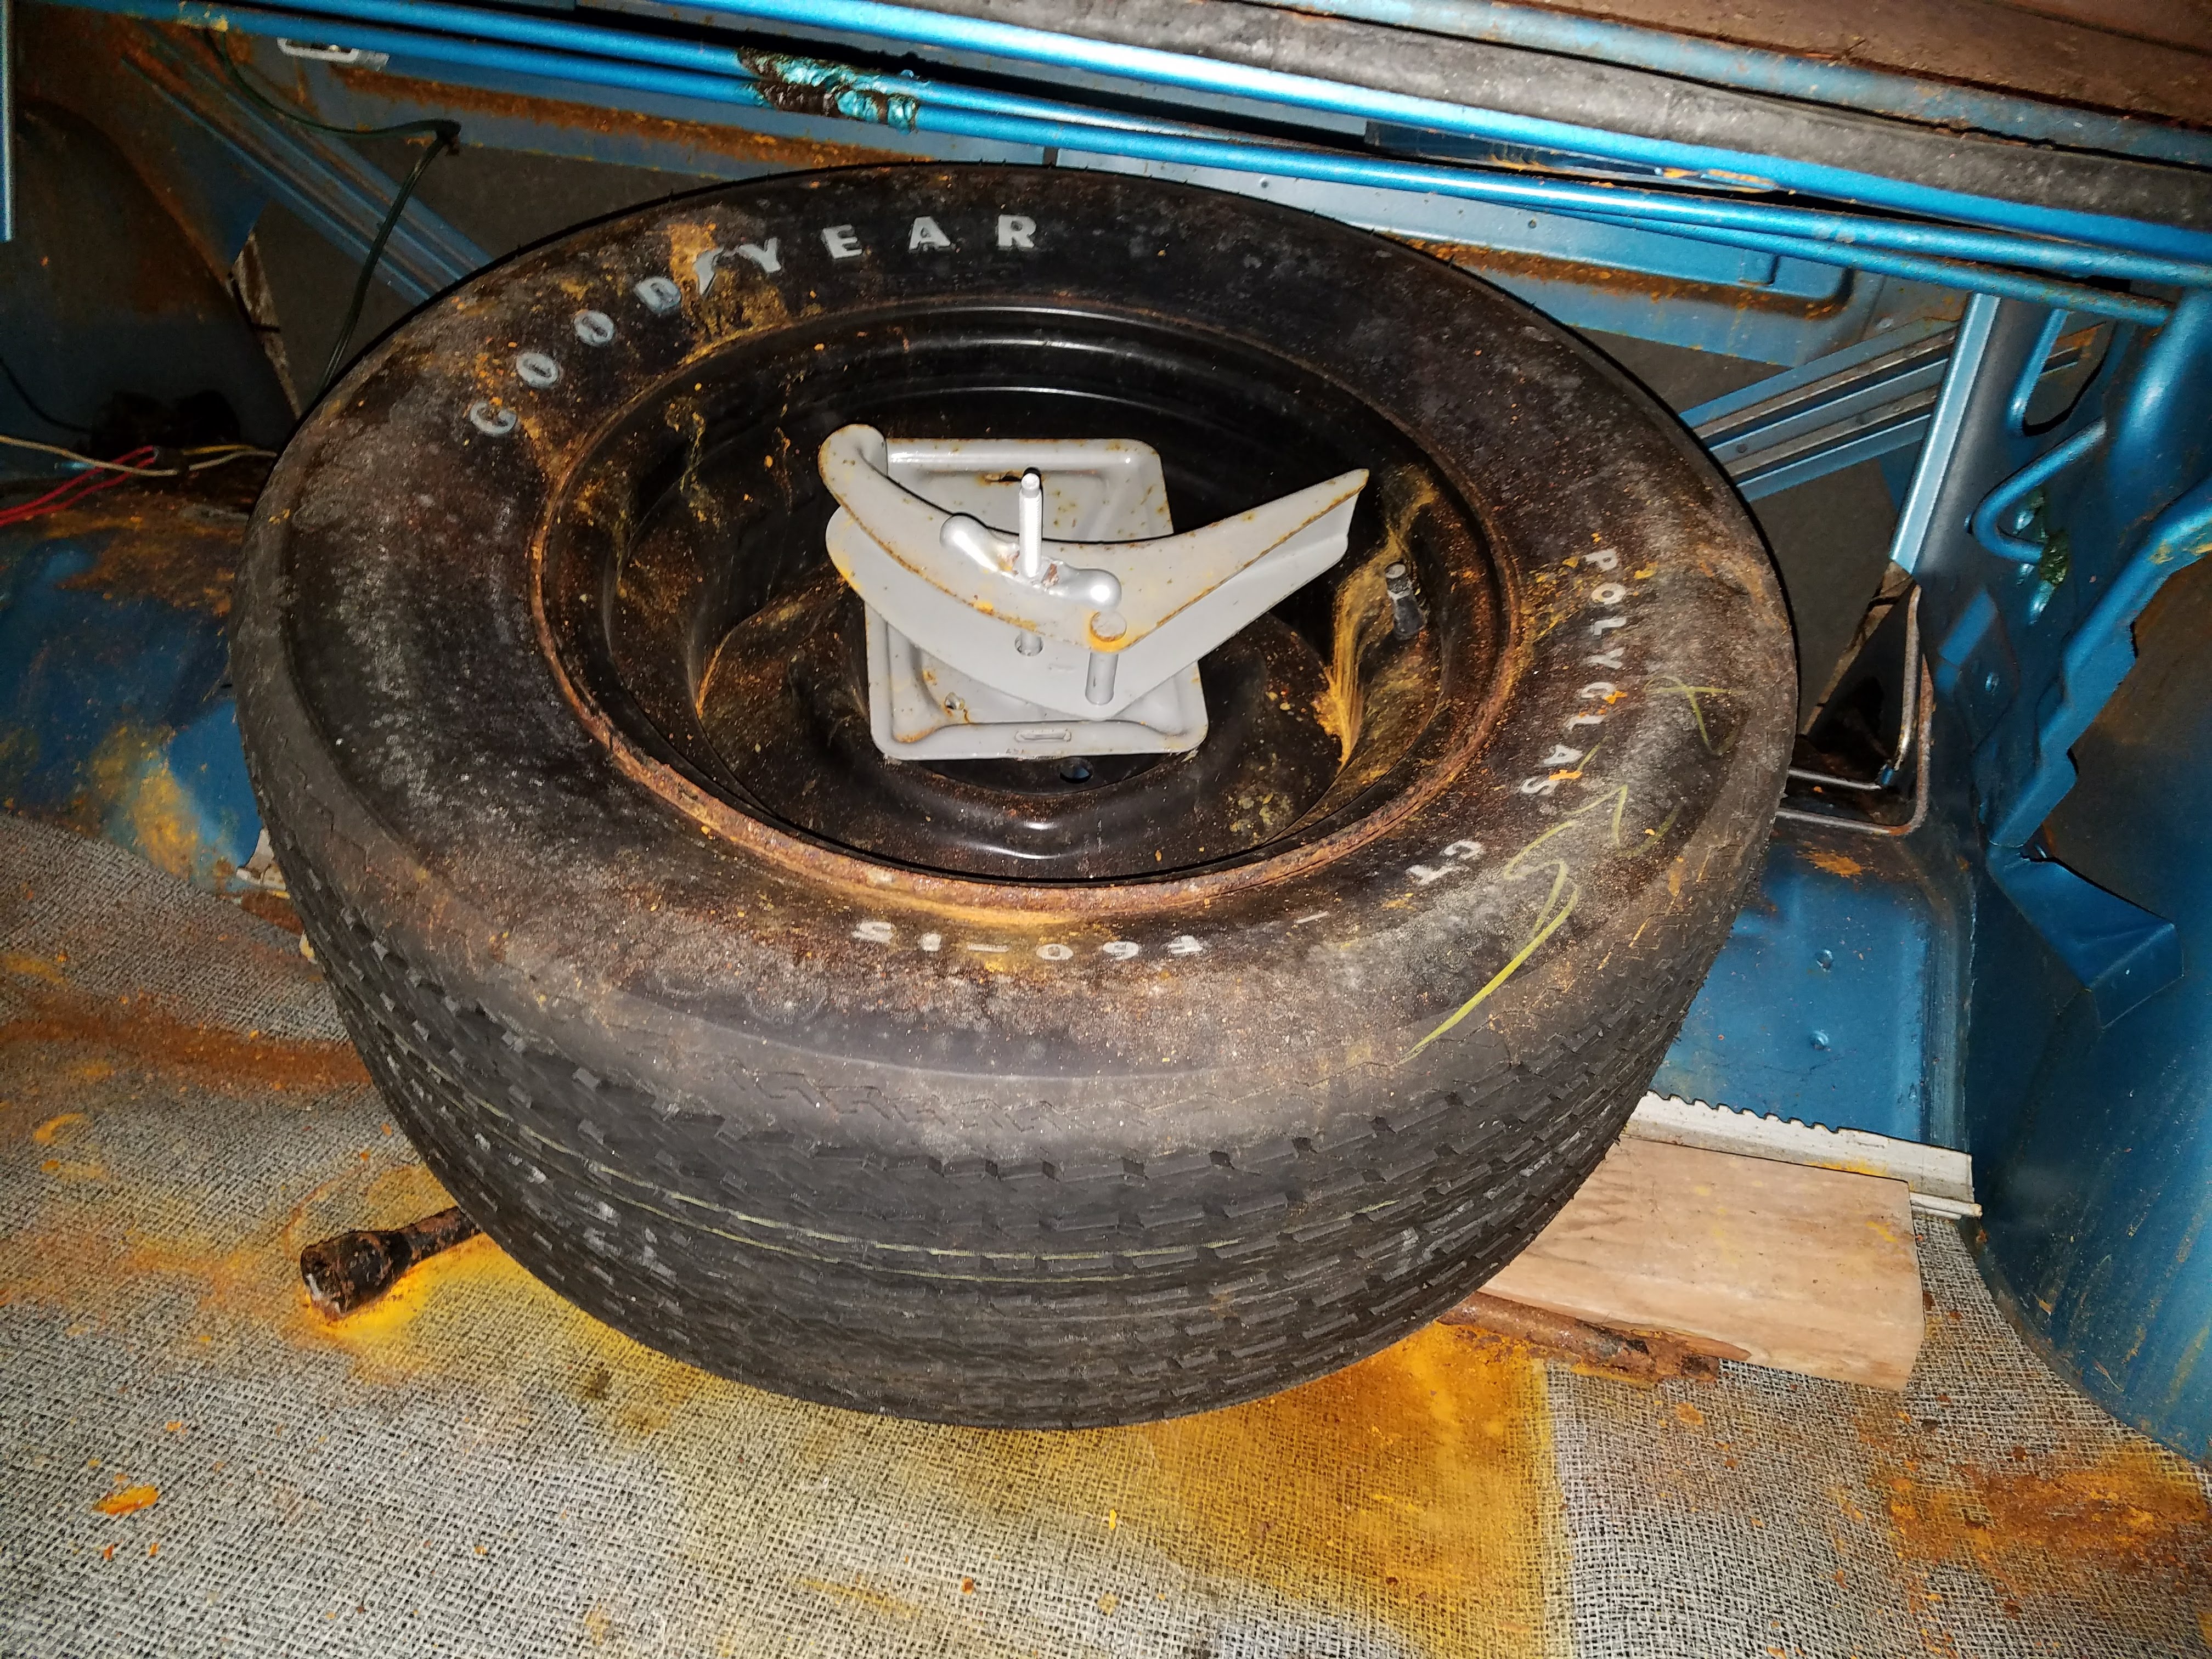 The tires (including the spare) still have the grease pencil writing on them from workers at the factory.